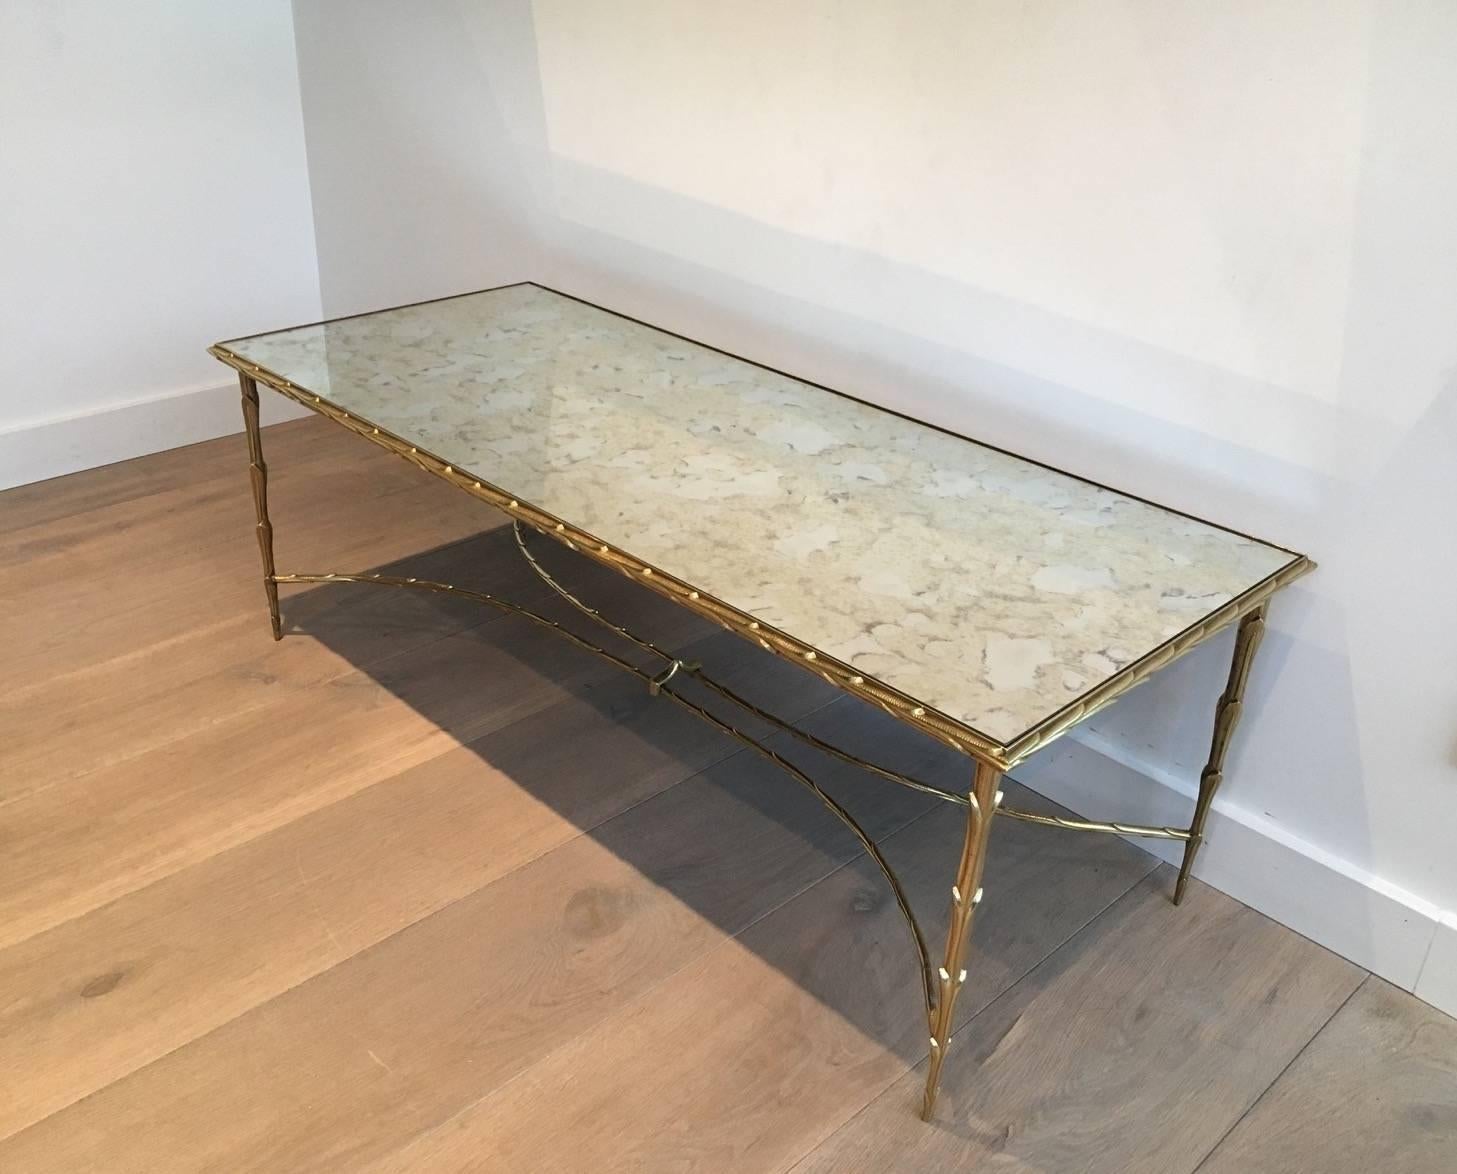 Faux bamboo bronze coffee table with antique mirror top by Maison Bagués.